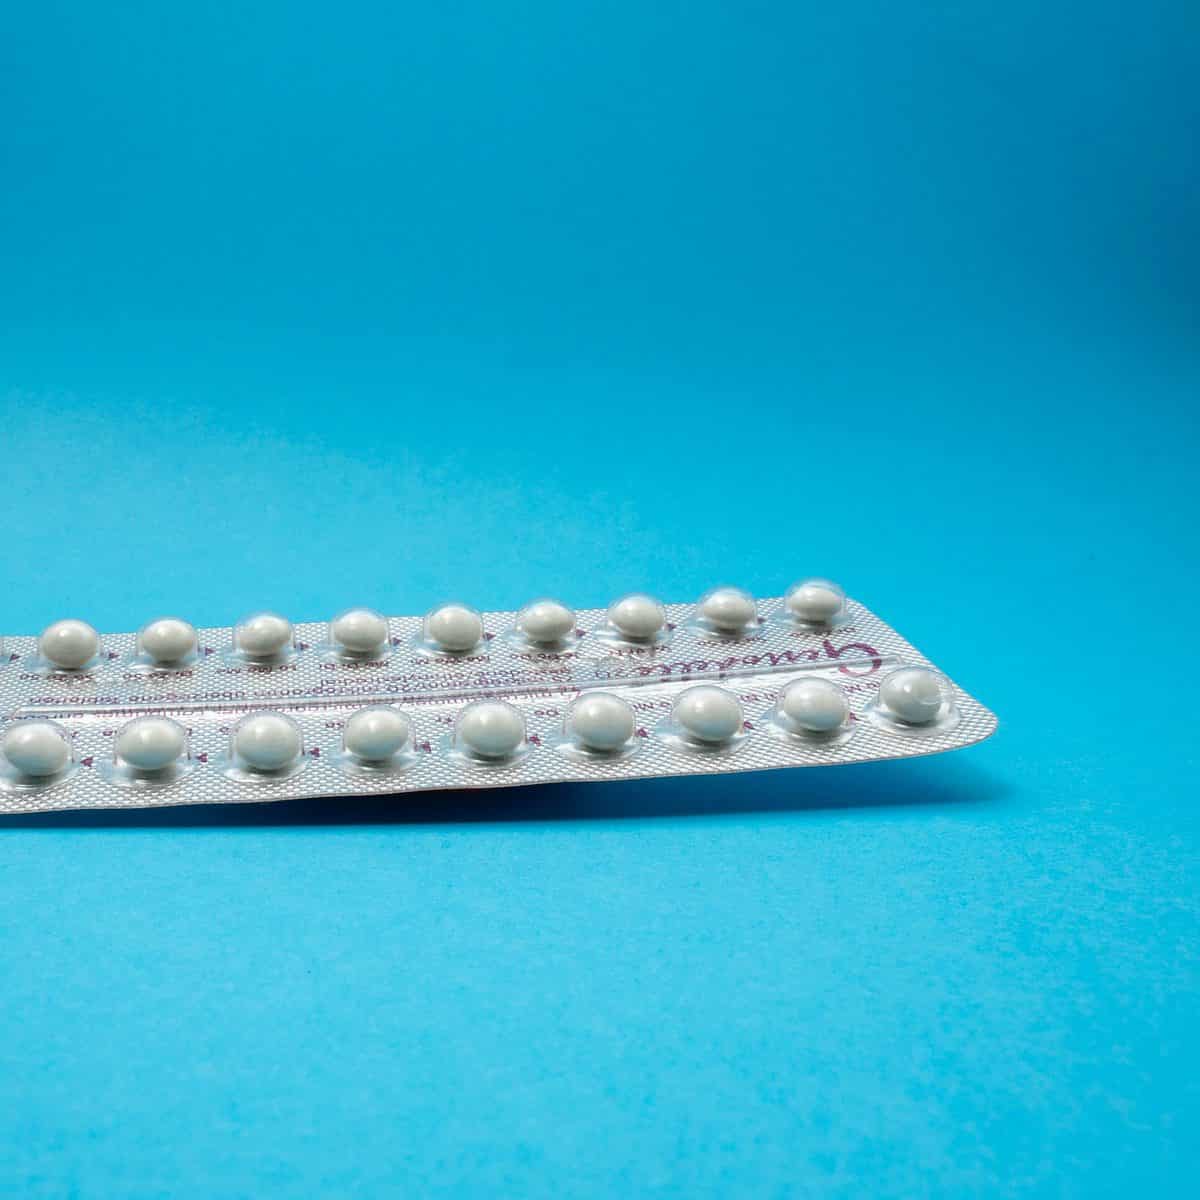 N.J. governor signs legislation allowing pharmacists to dispense hormonal contraceptives without requiring a prescription